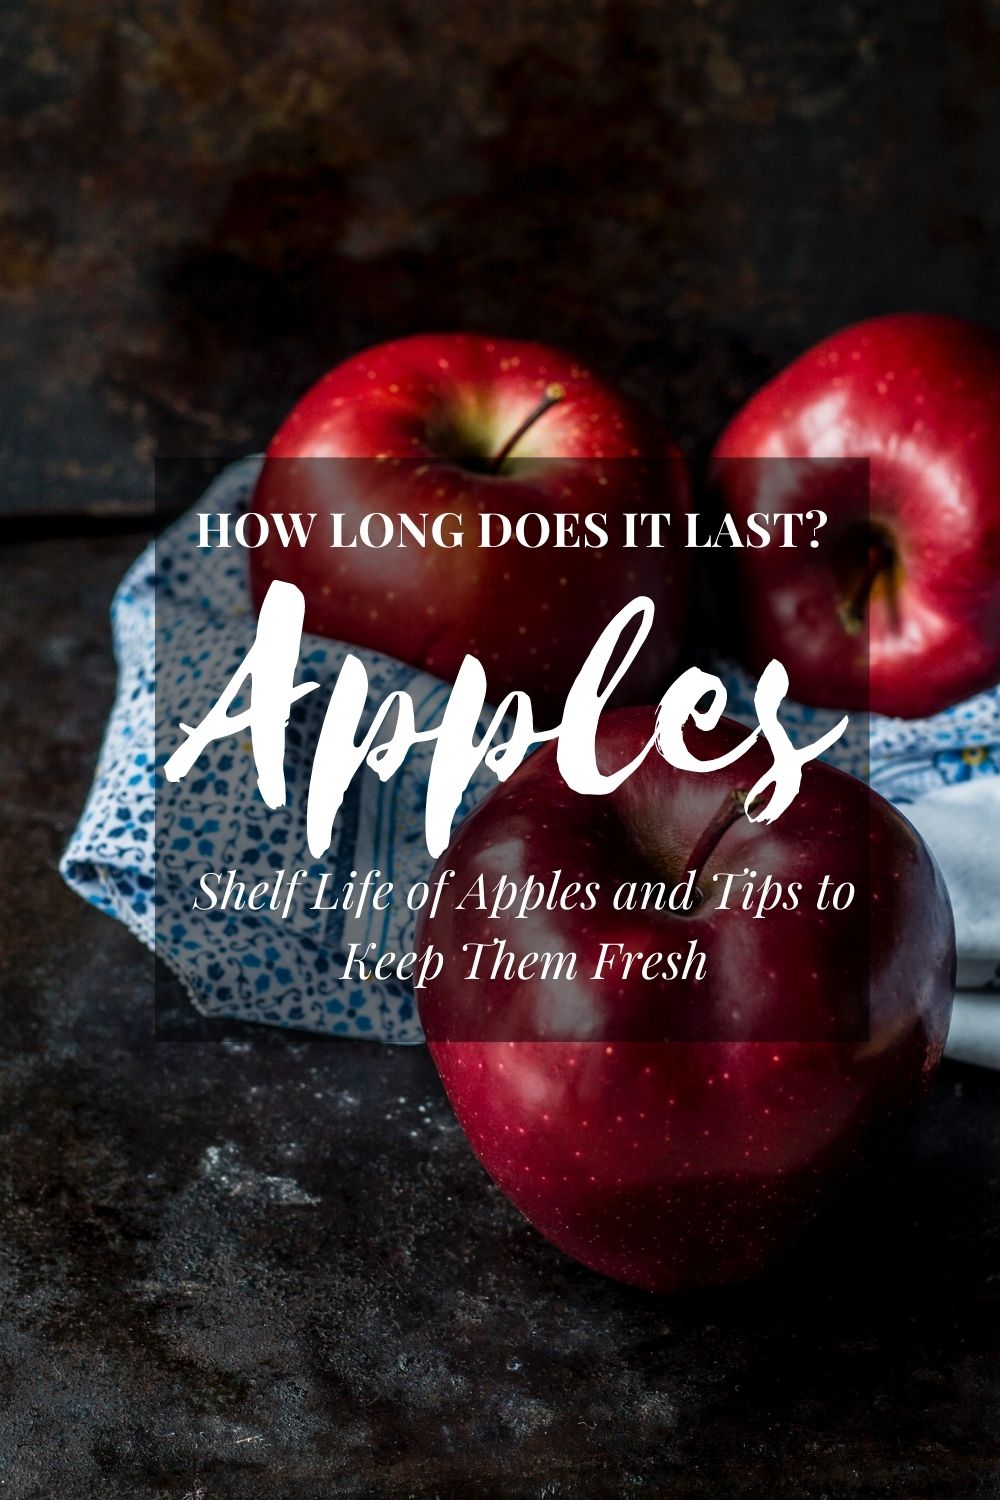 How Long Do Apples Last? Shelf Life of Apples and Tips to Keep Them Fresh